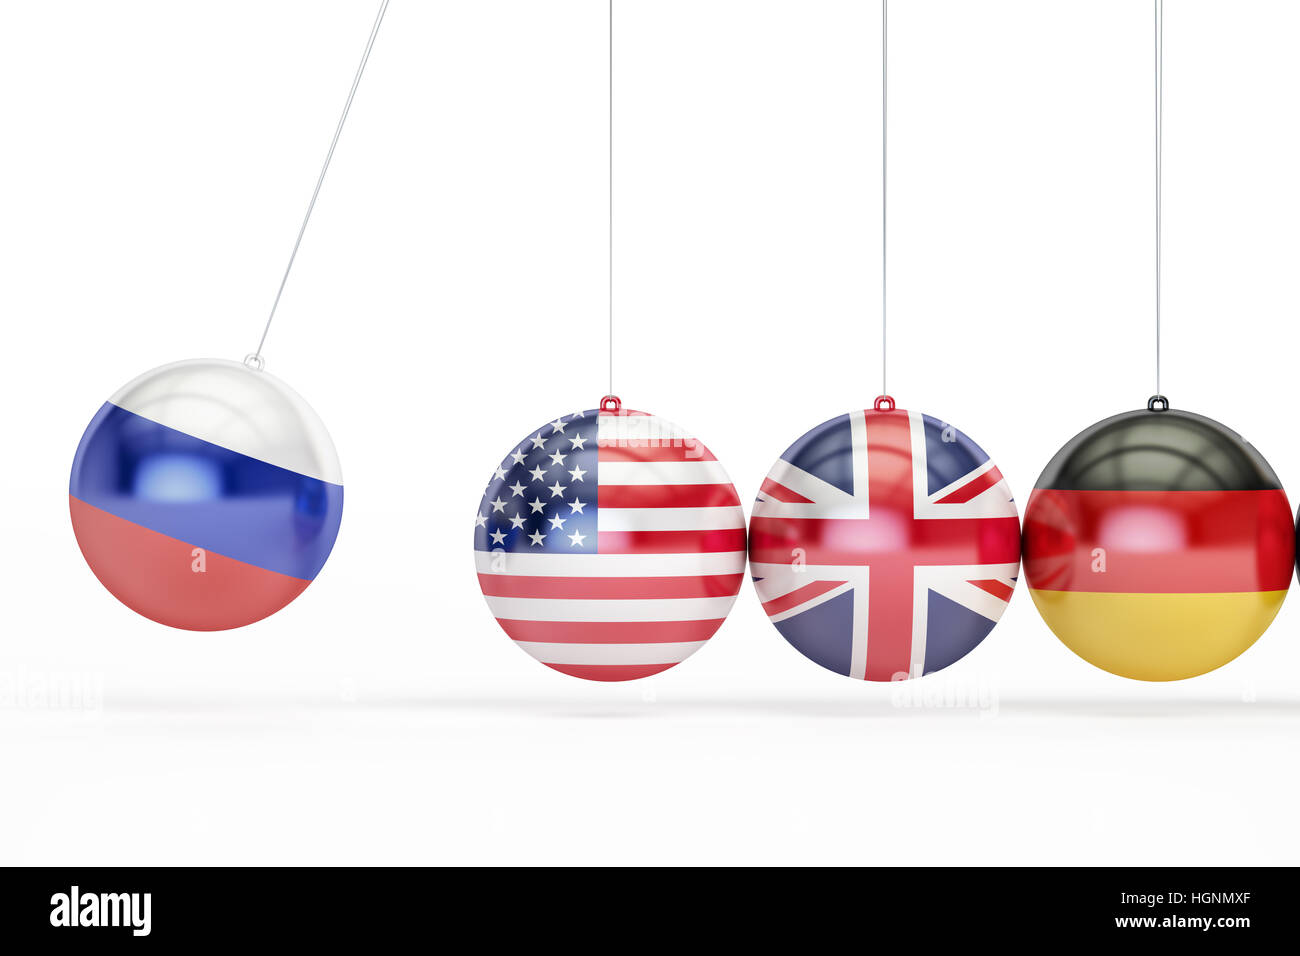 Russia, USA, Great Britain, Germany political war conflict concept. 3D rendering isolated on white background Stock Photo